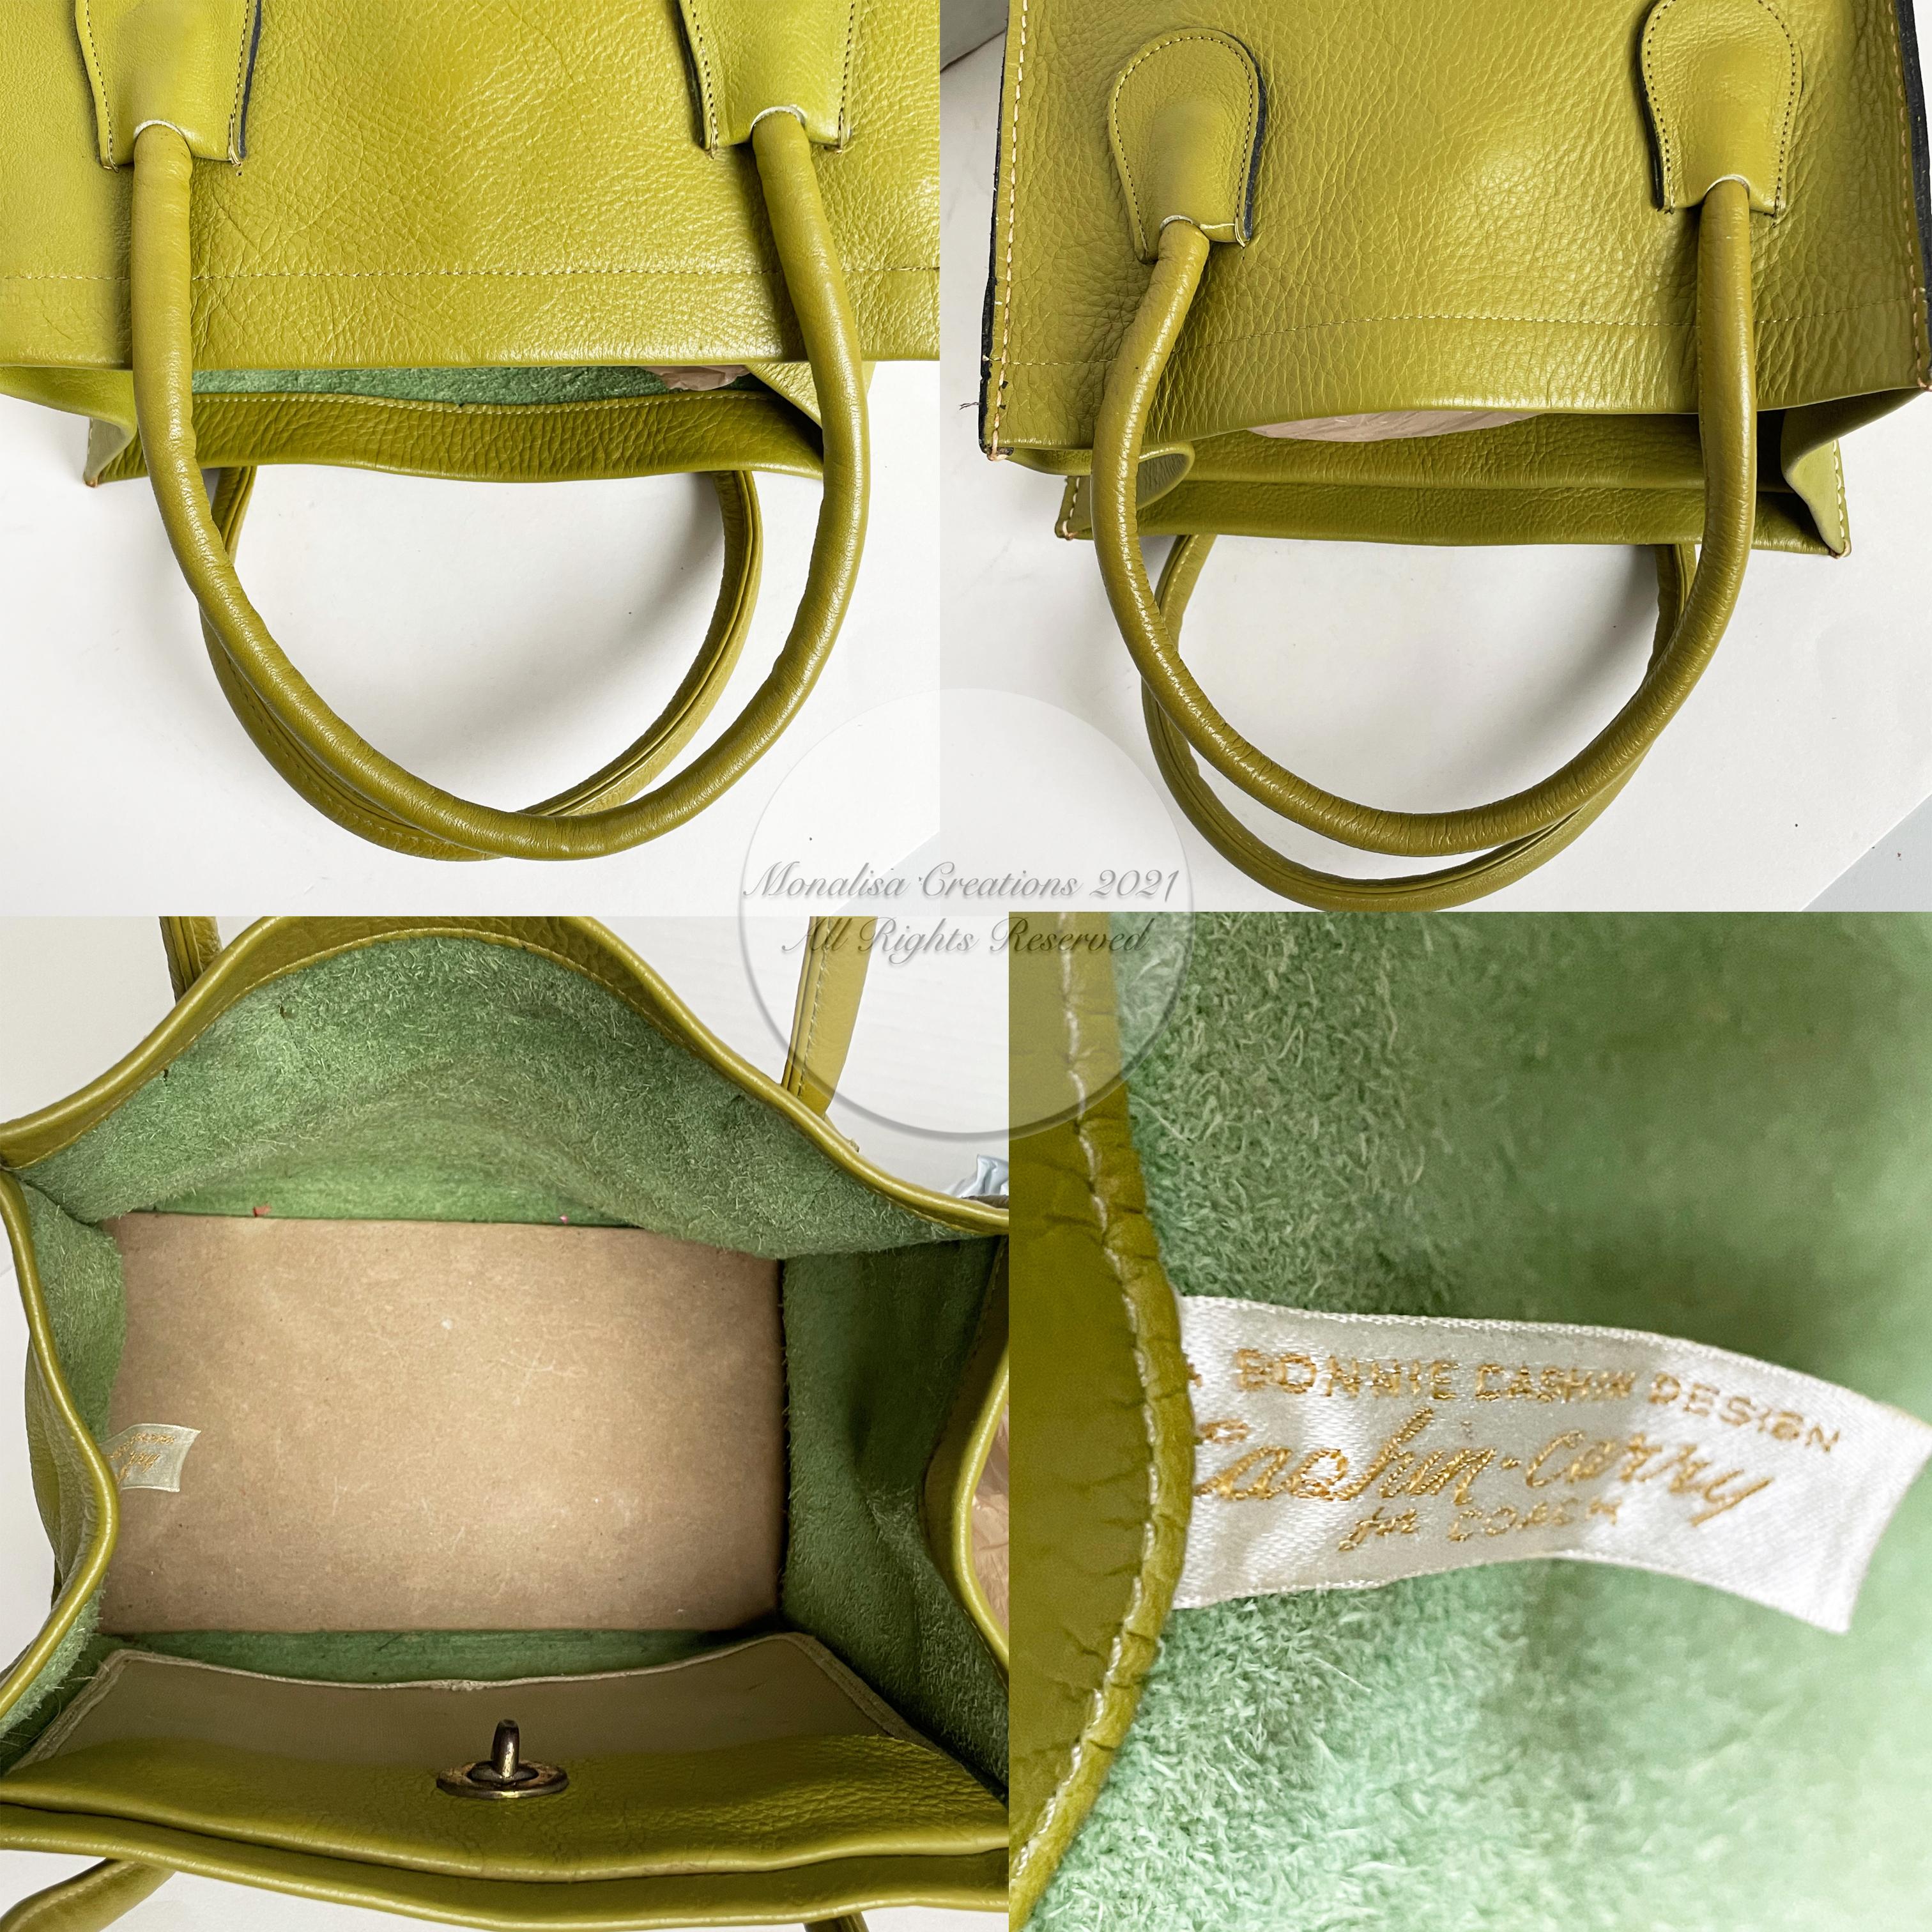 Bonnie Cashin for Coach Dinky Tote Bag Cashin Carry Lime Green Leather 60s NYC  2